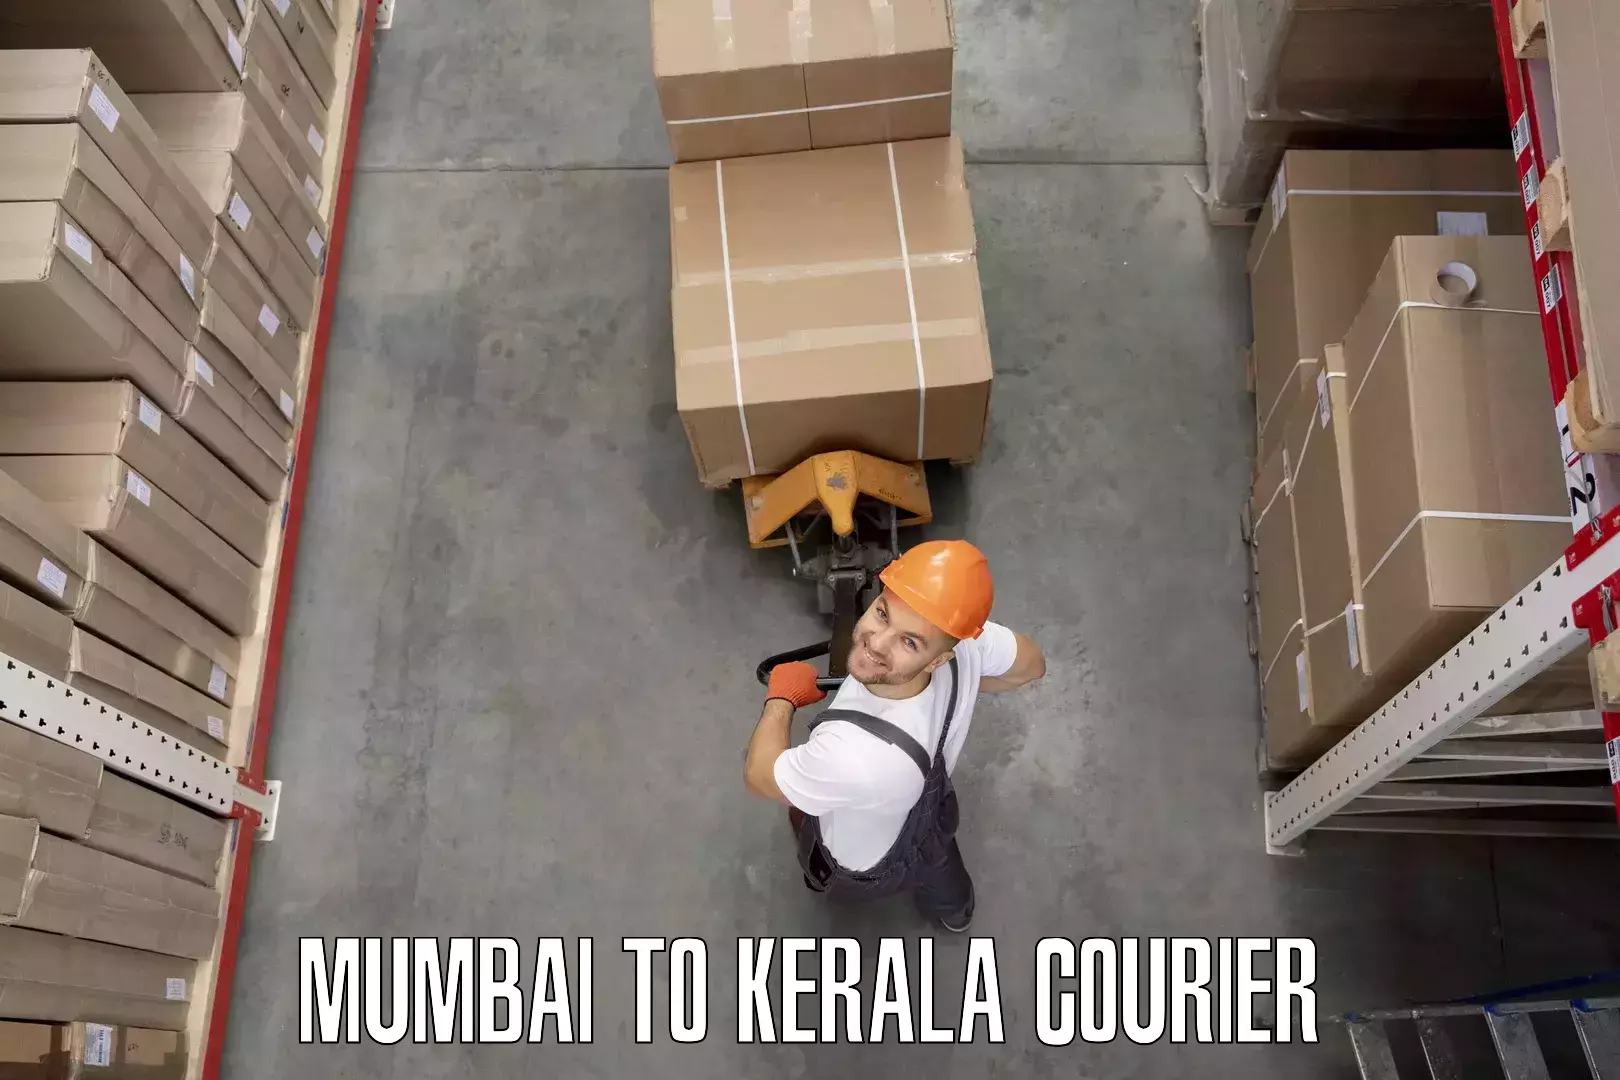 Furniture transport specialists Mumbai to Cochin University of Science and Technology